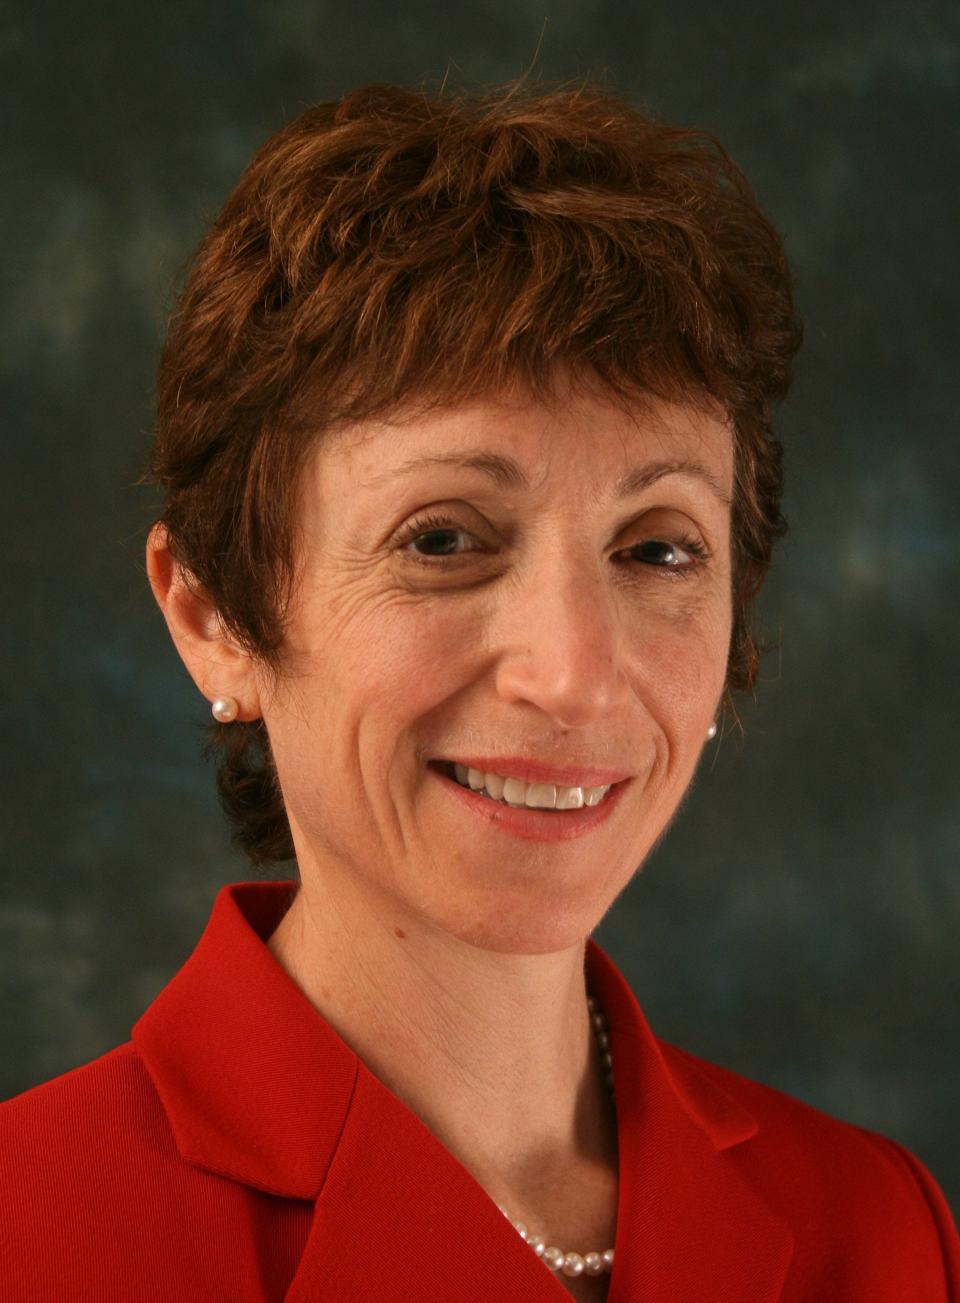 Roberta Ness is an epidemiologist and former dean of the University of Texas School of Public Health.